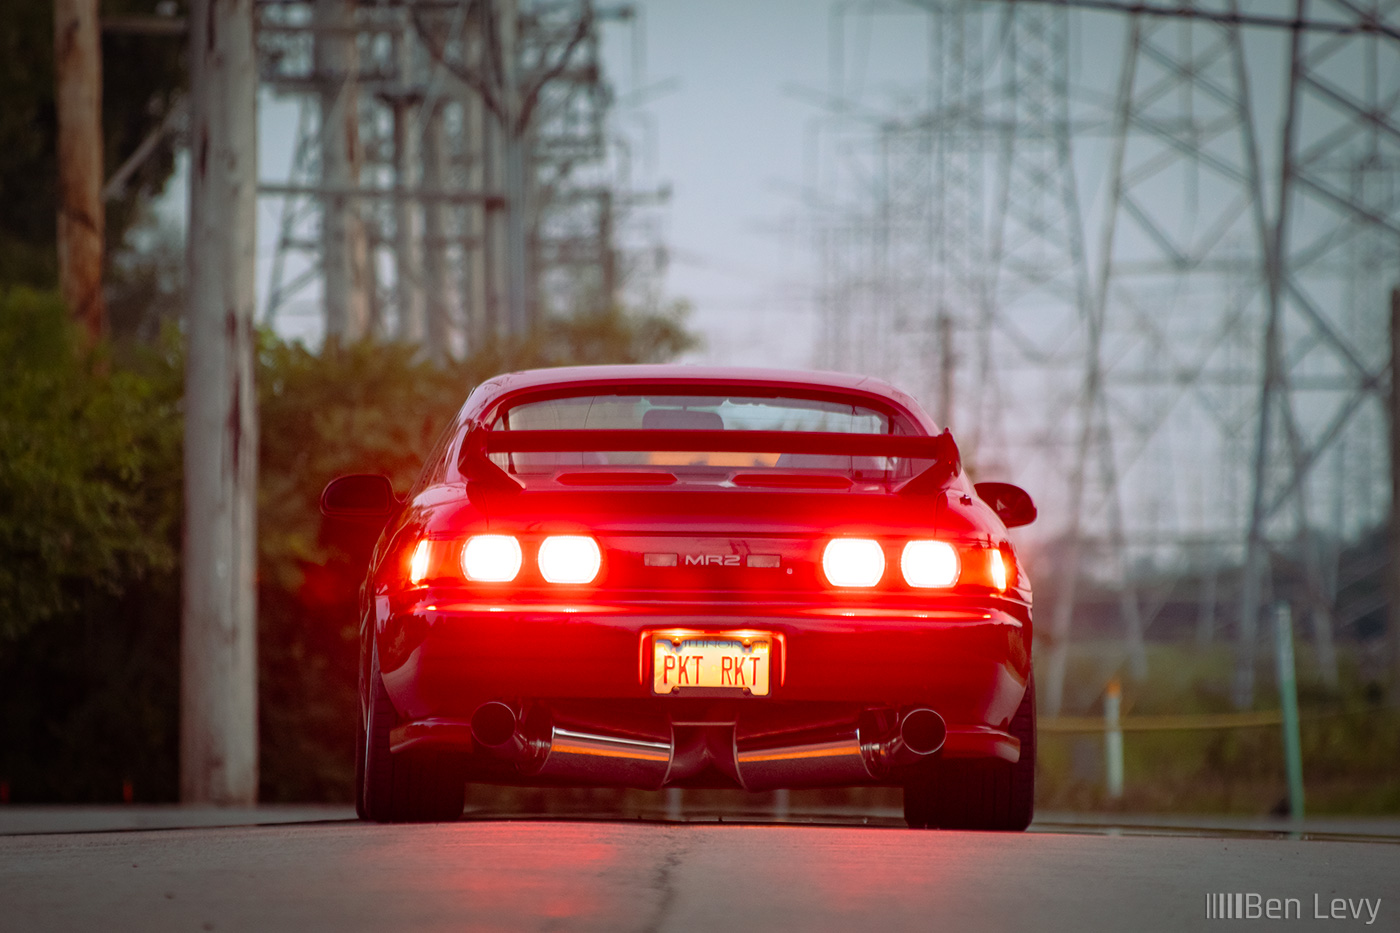 Rear Shot of a Red Toyota MR2 Turbo with JDM Taillights